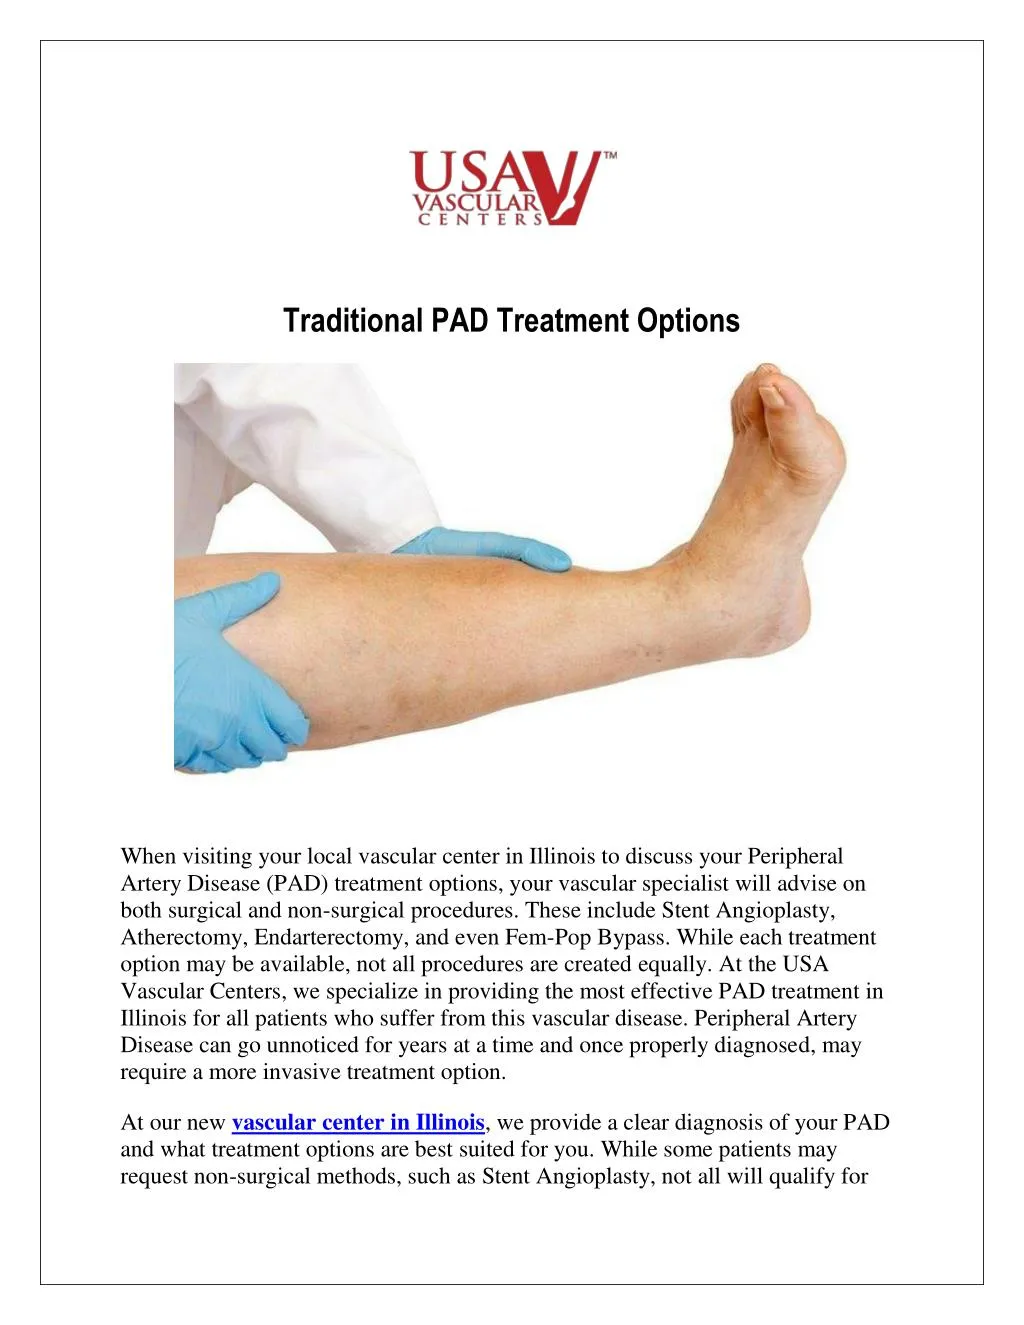 traditional pad treatment options